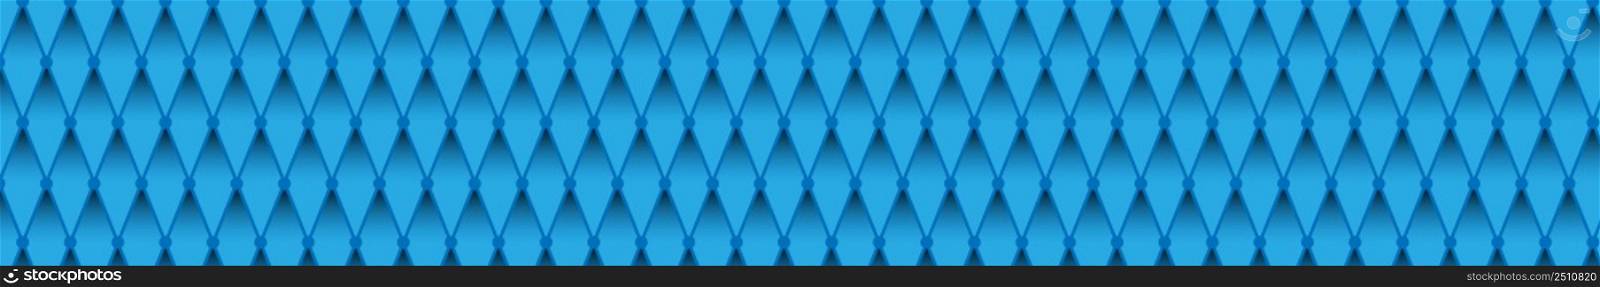 Blue background with diagonal lines forming a rhombus. Vector illustration for banners, textures, simple backgrounds and creative design